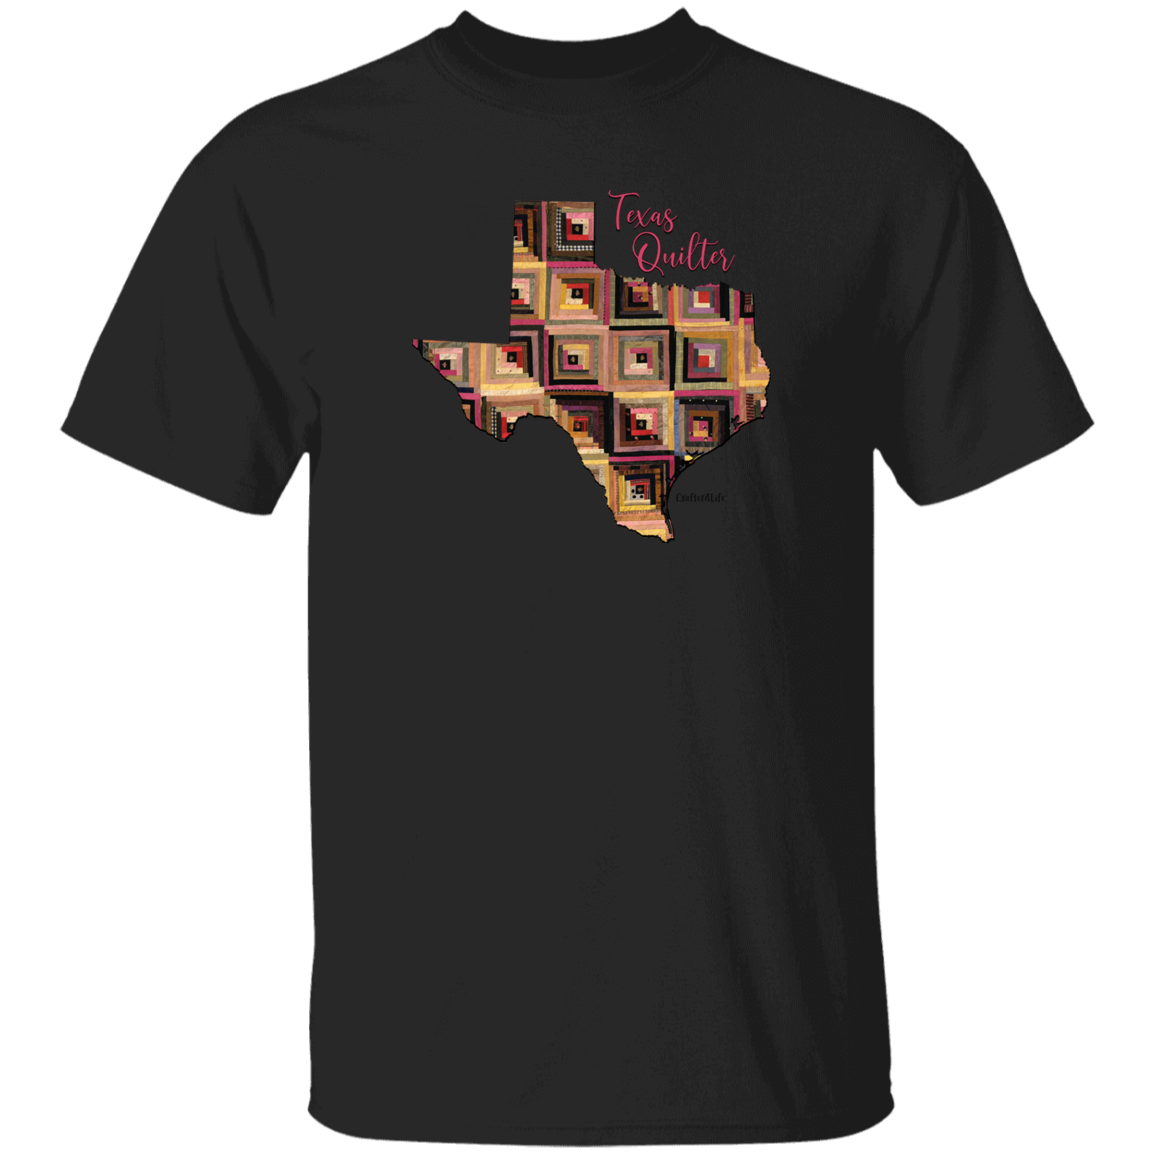 Texas Quilter T-Shirt, Gift for Quilting Friends and Family